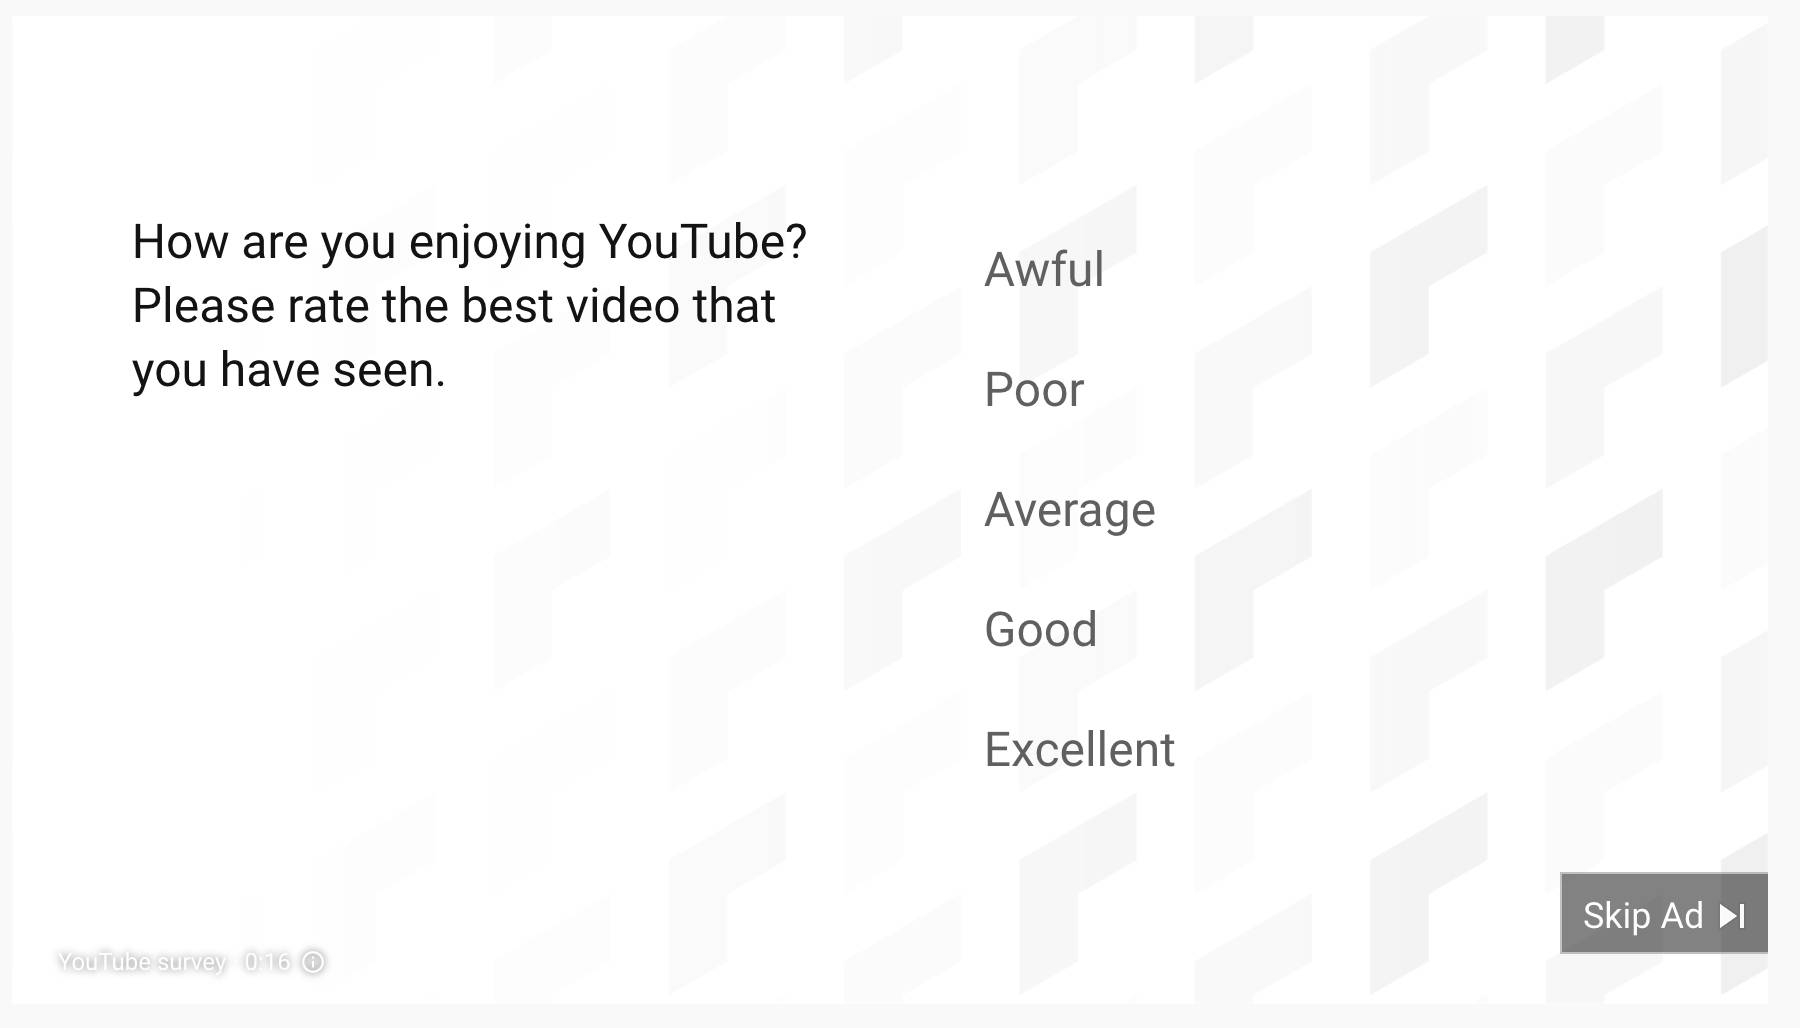 Product feedback example from YouTube